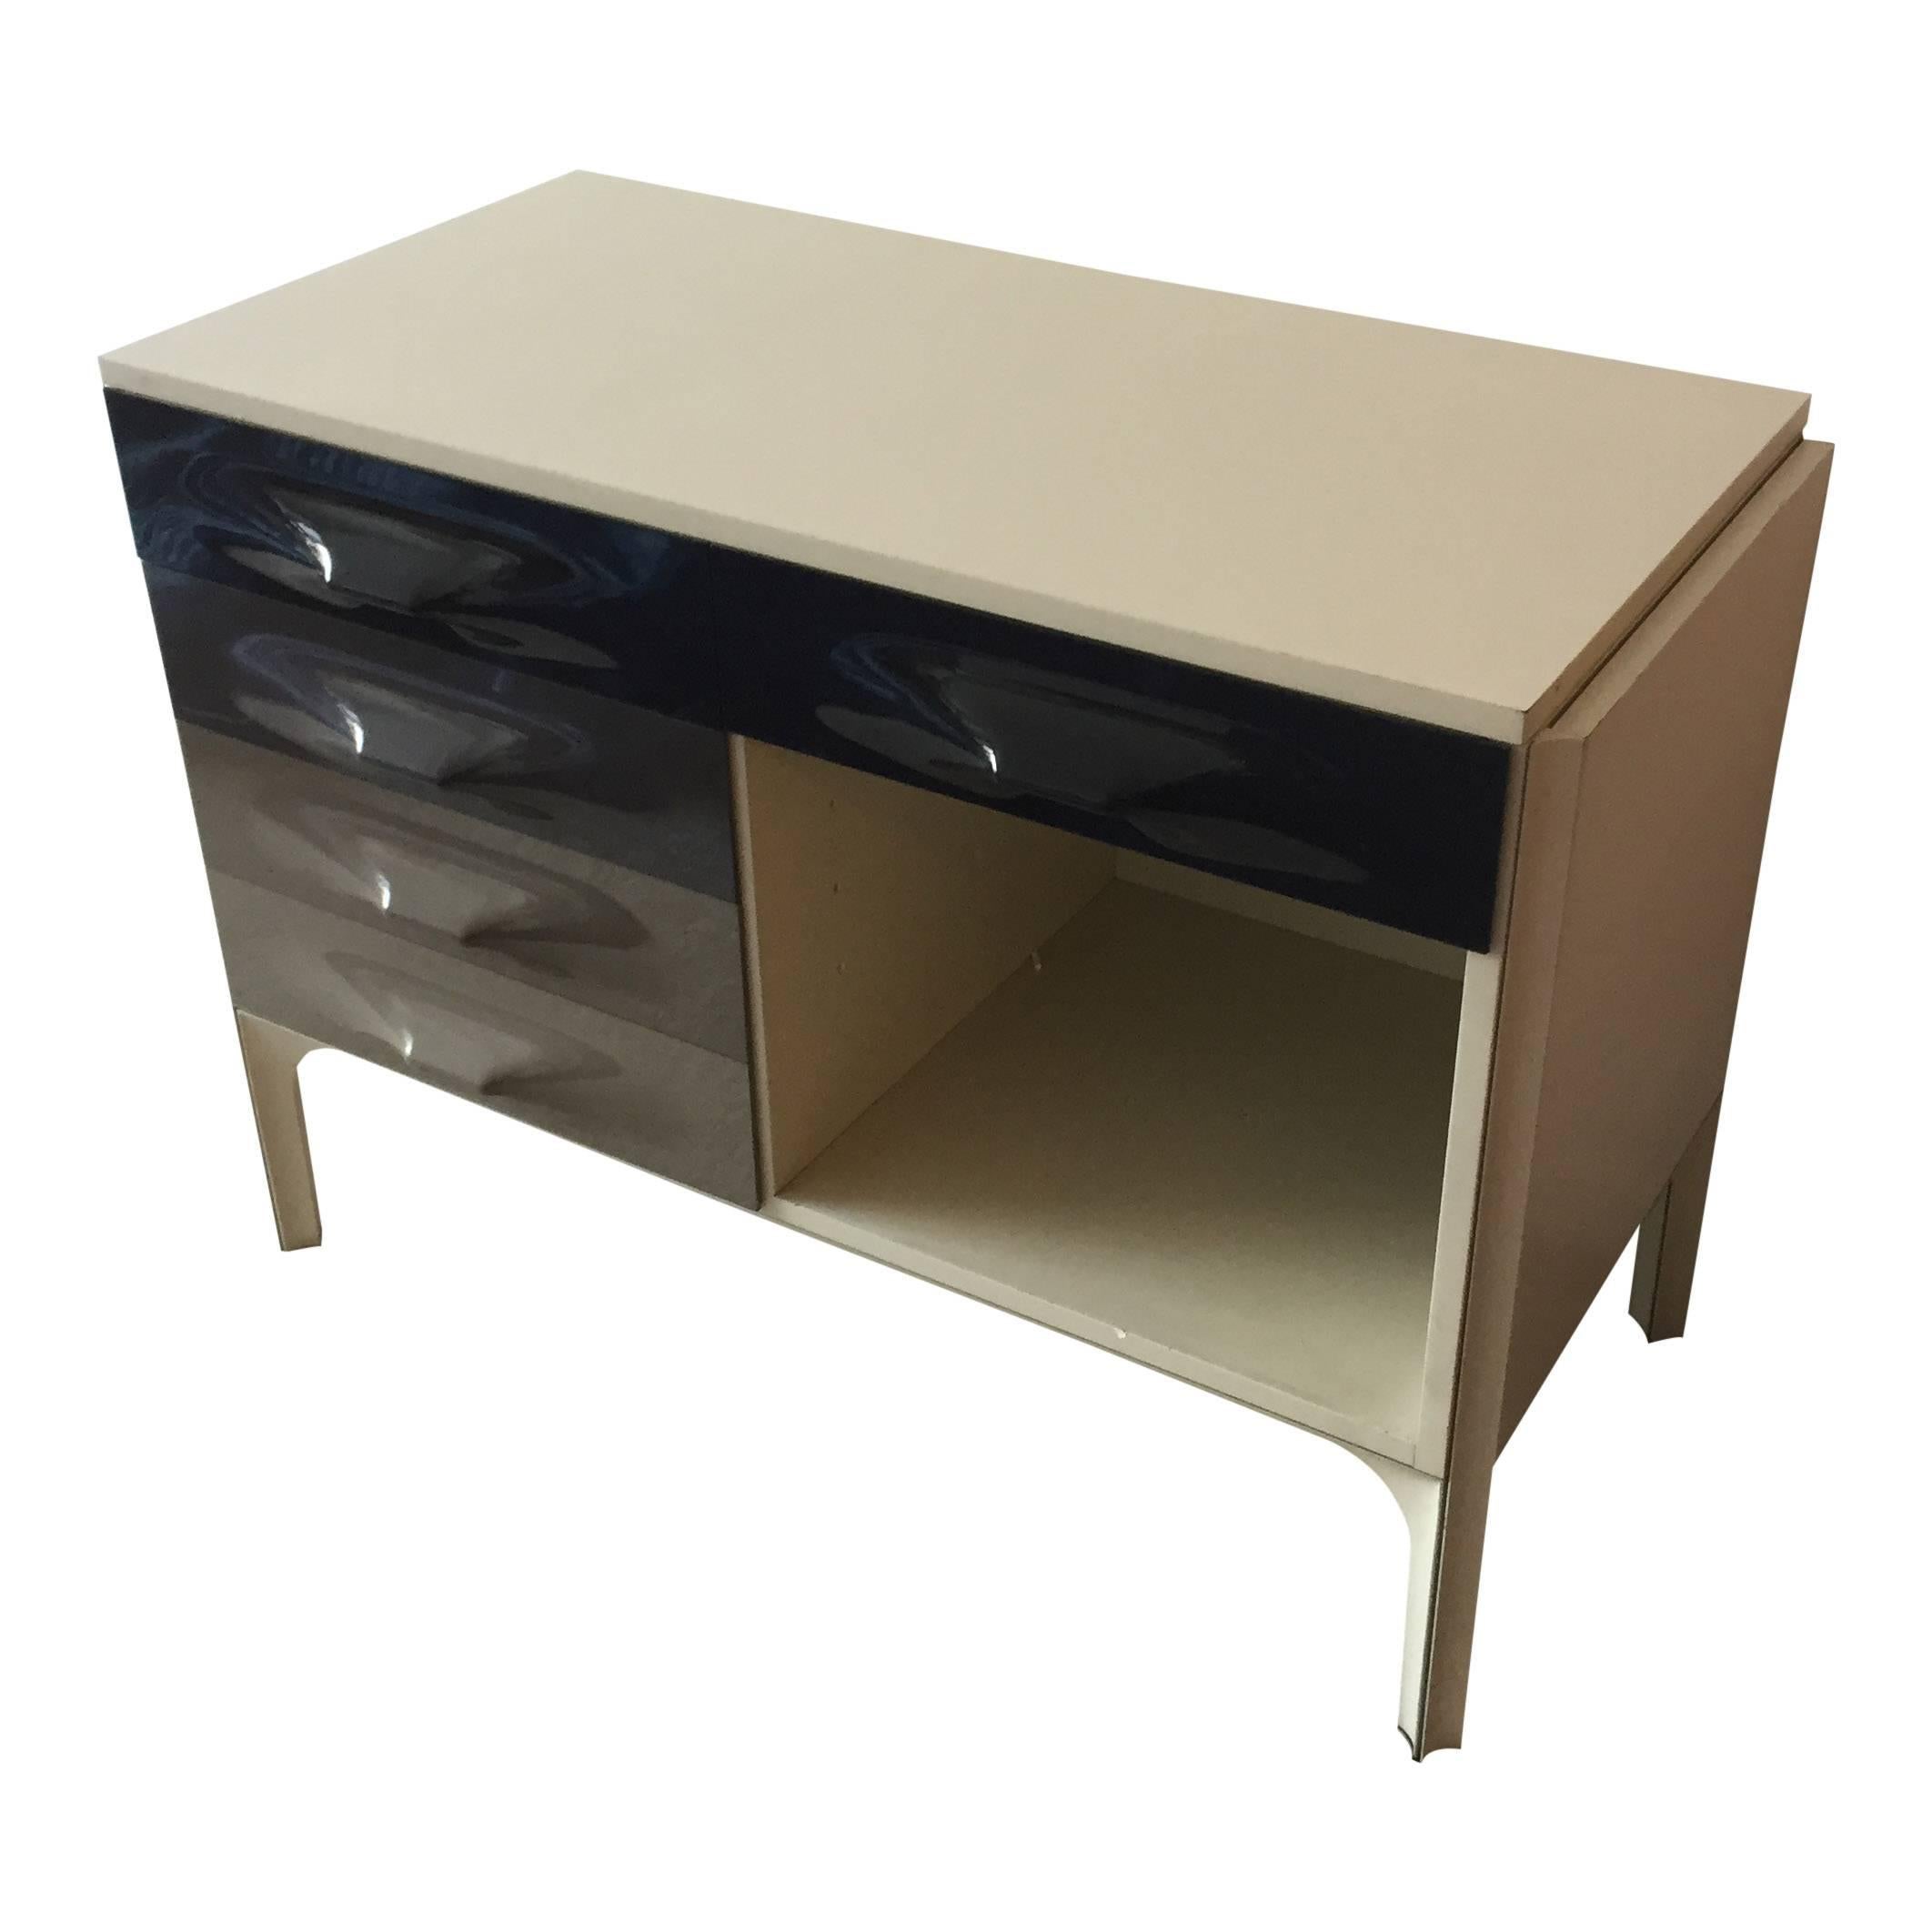 For your consideration is a striking piece of Industrial Design by one of the 20th century's leading designers the DF2000 sliding-top desk by Raymond Loewy.

This hard-to-find piece was manufactured in France. Its unusual form is characteristic of